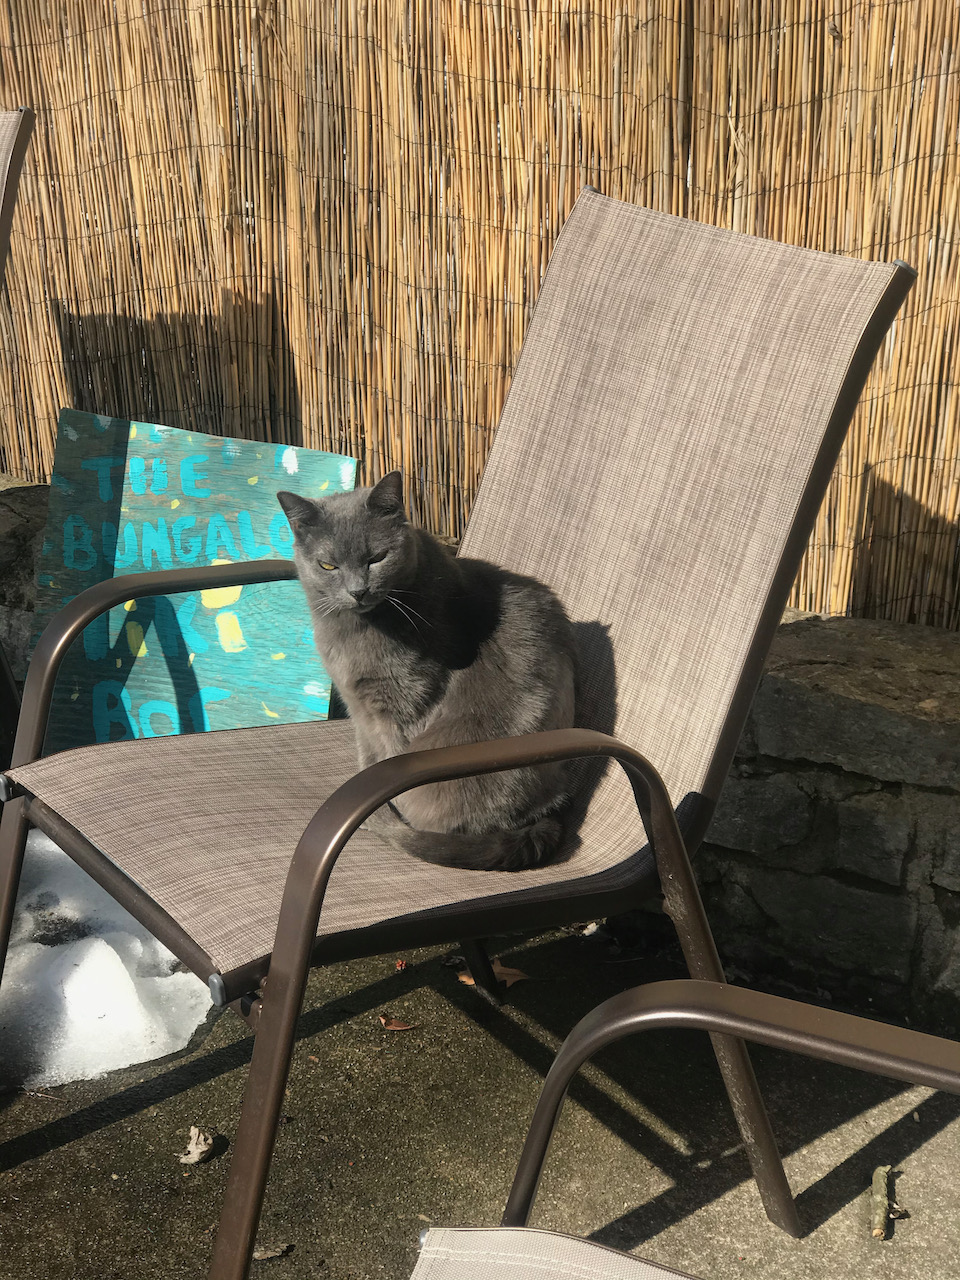 Shady Cat enjoying sitting in her chair outside